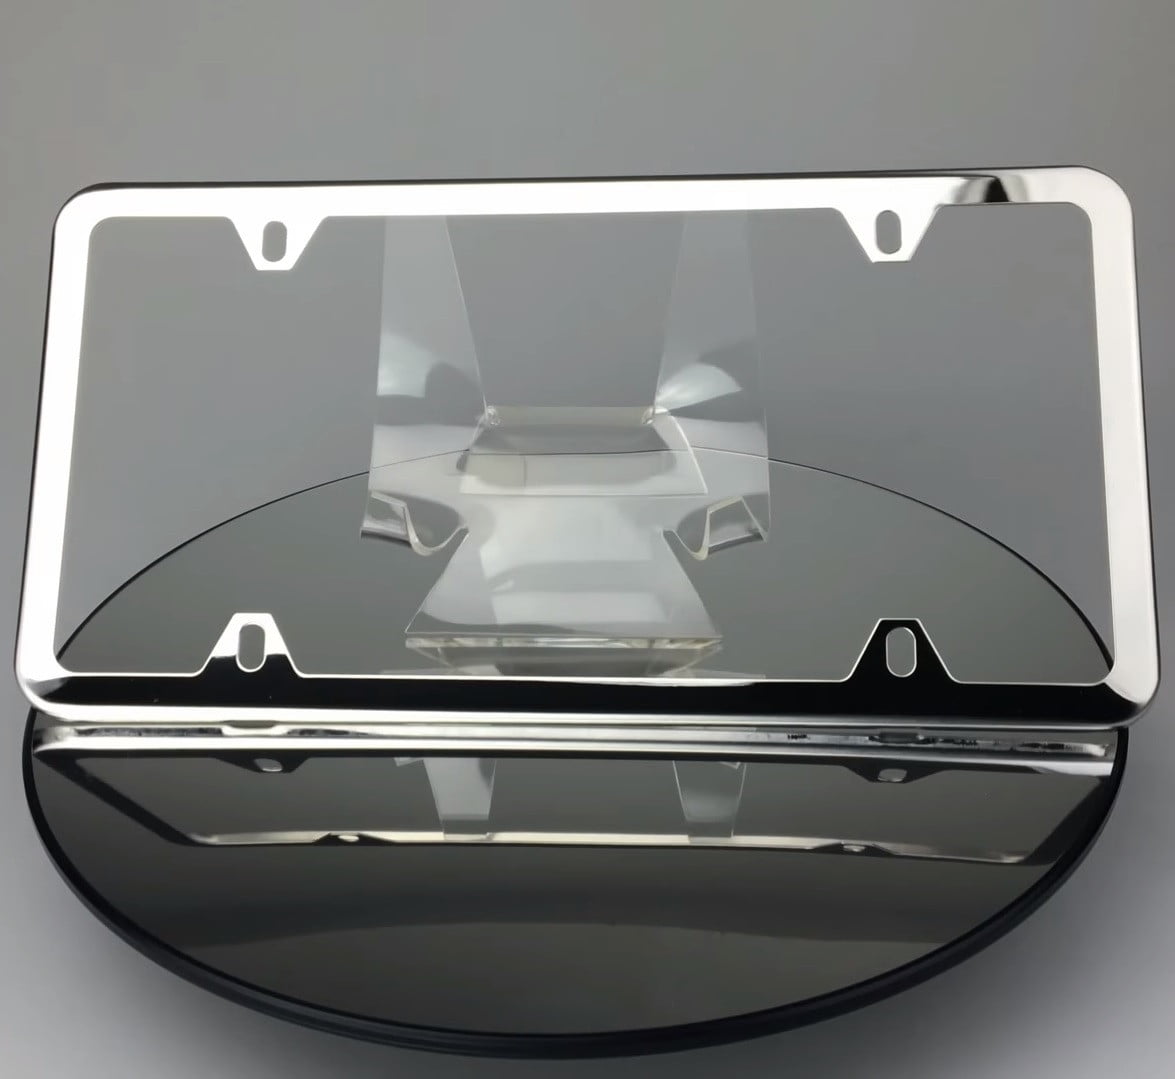 Details about   Fit Toyota T304 Laser Etching SS Polish Black License Plate Frame w/Metal Cap